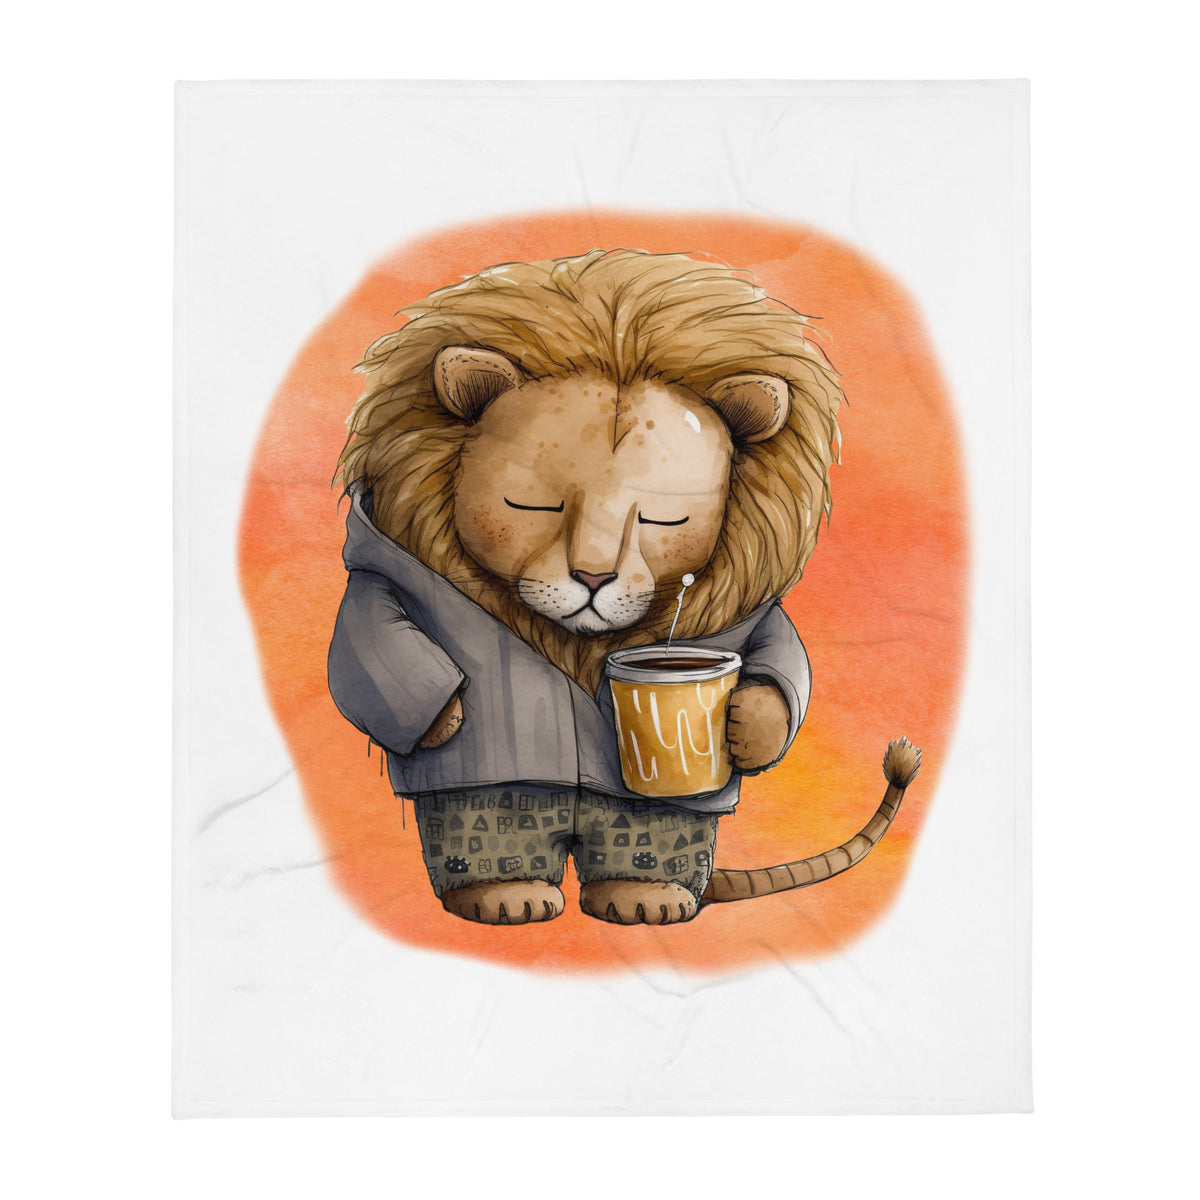 Sleepy Lion 100% Polyester Soft Silk Touch Fabric Throw Blanket - Cozy, Durable and Adorable